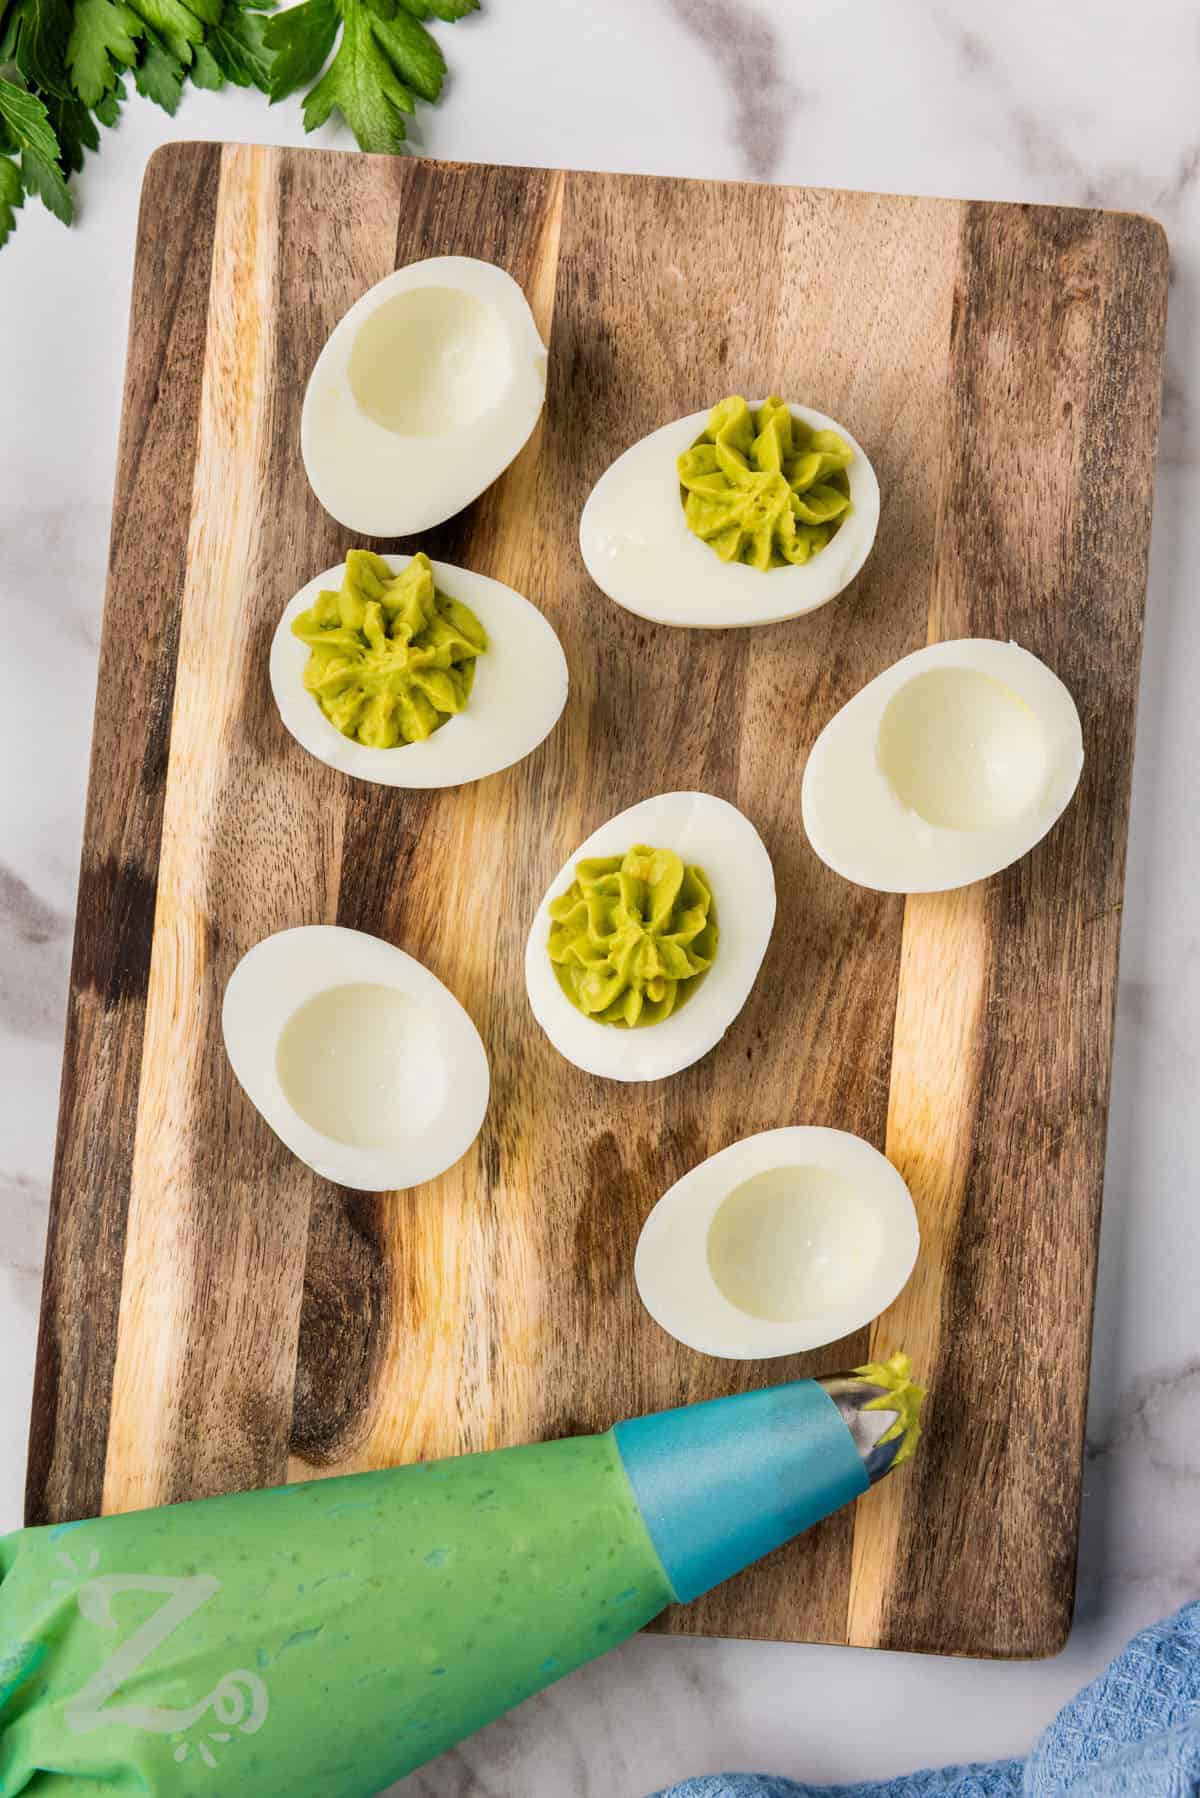 avocado deviled eggs filling being piped into cooked egg whites